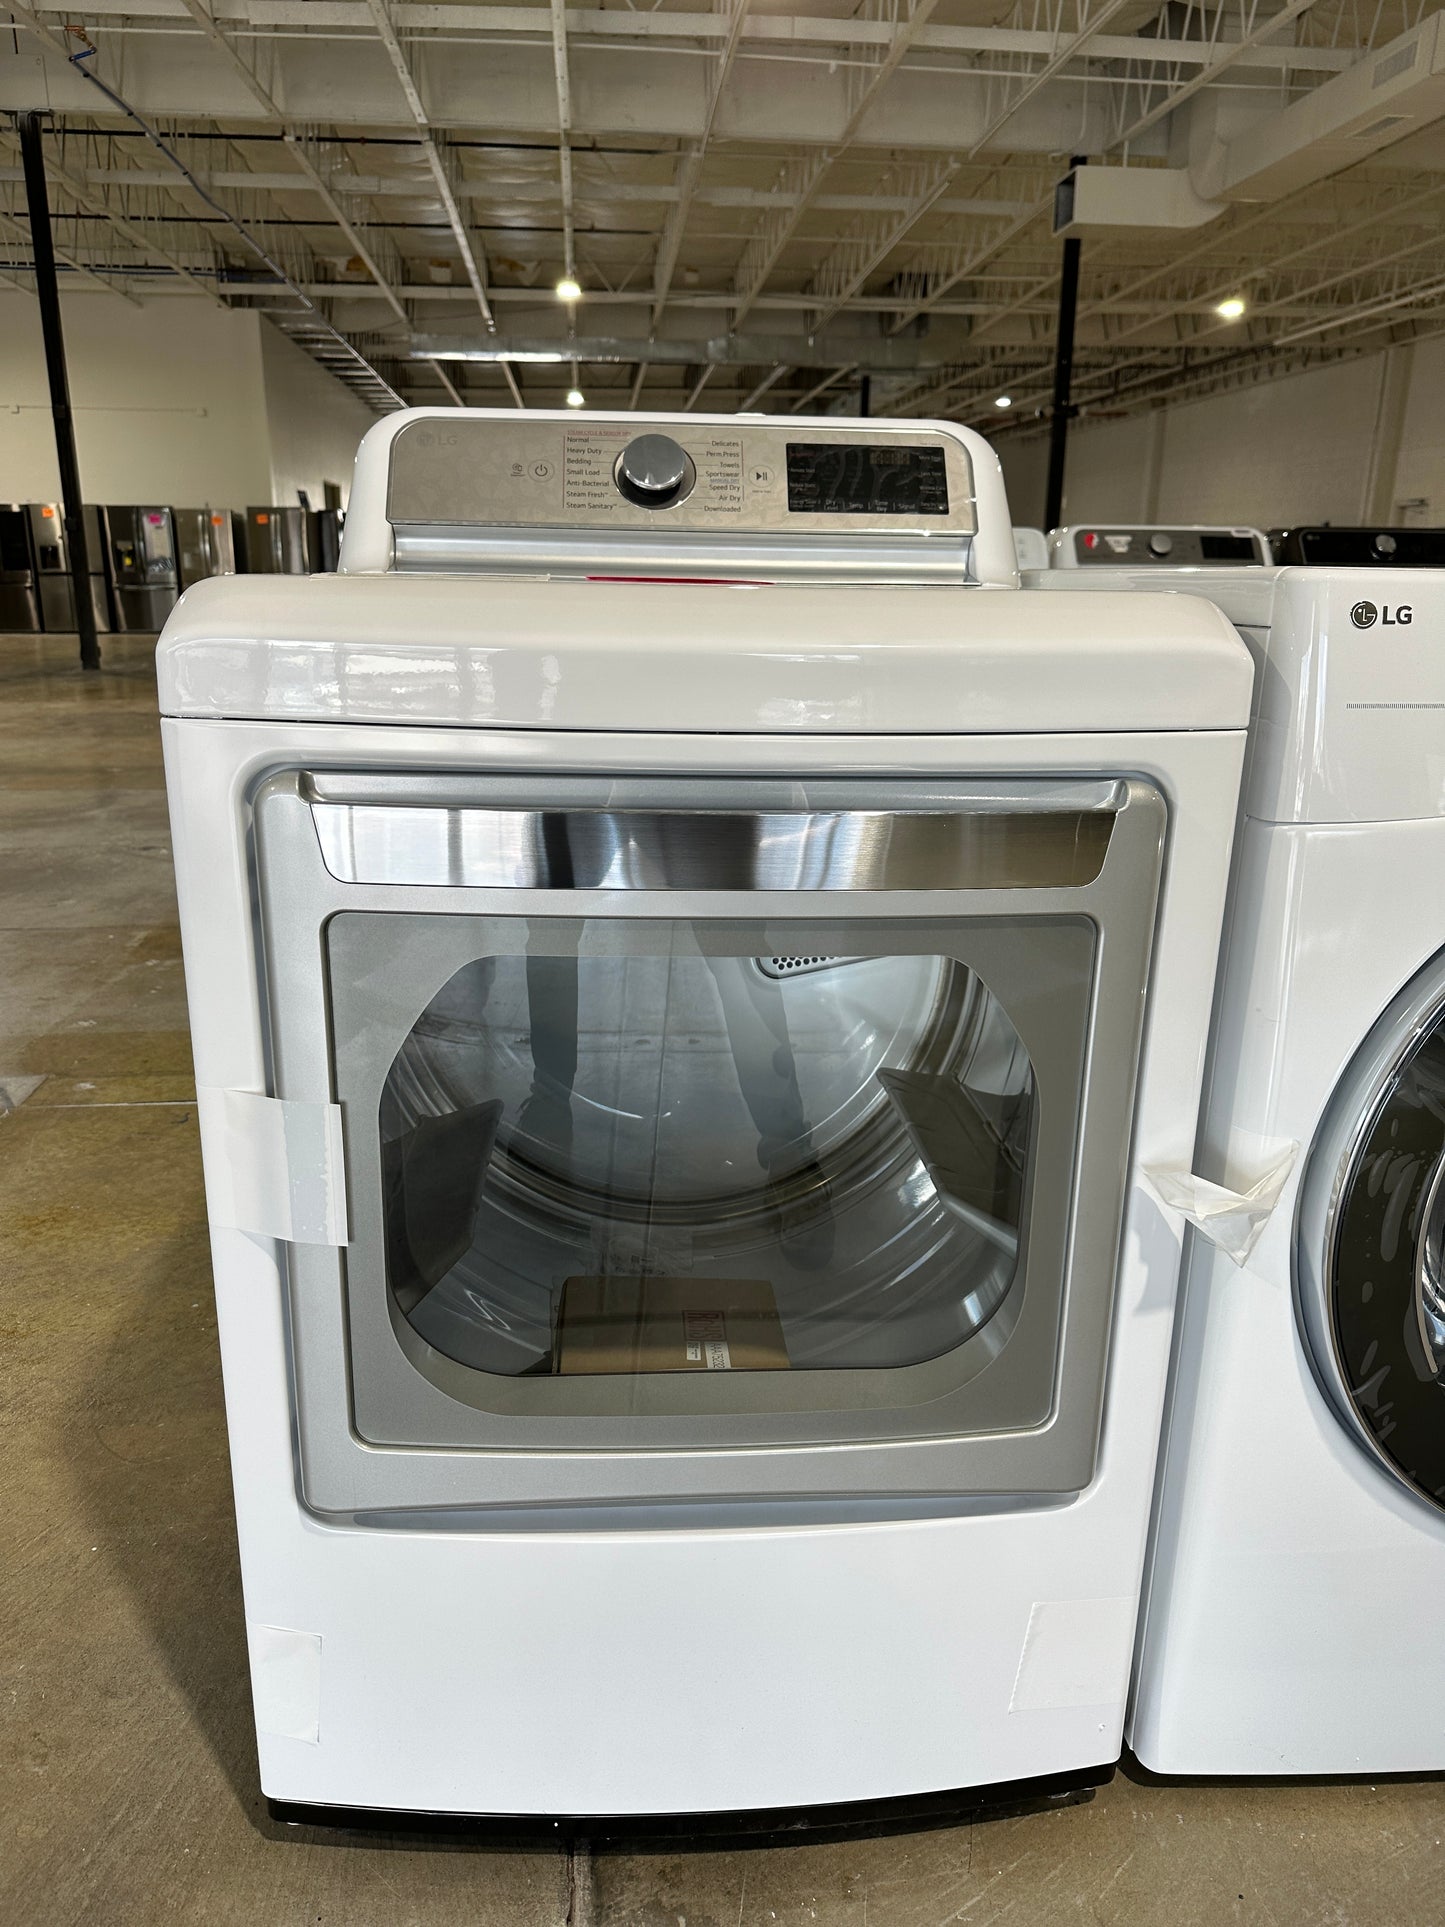 GORGEOUS NEW LG ELECTRIC DRYER - DRY11655S DLEX7800WE